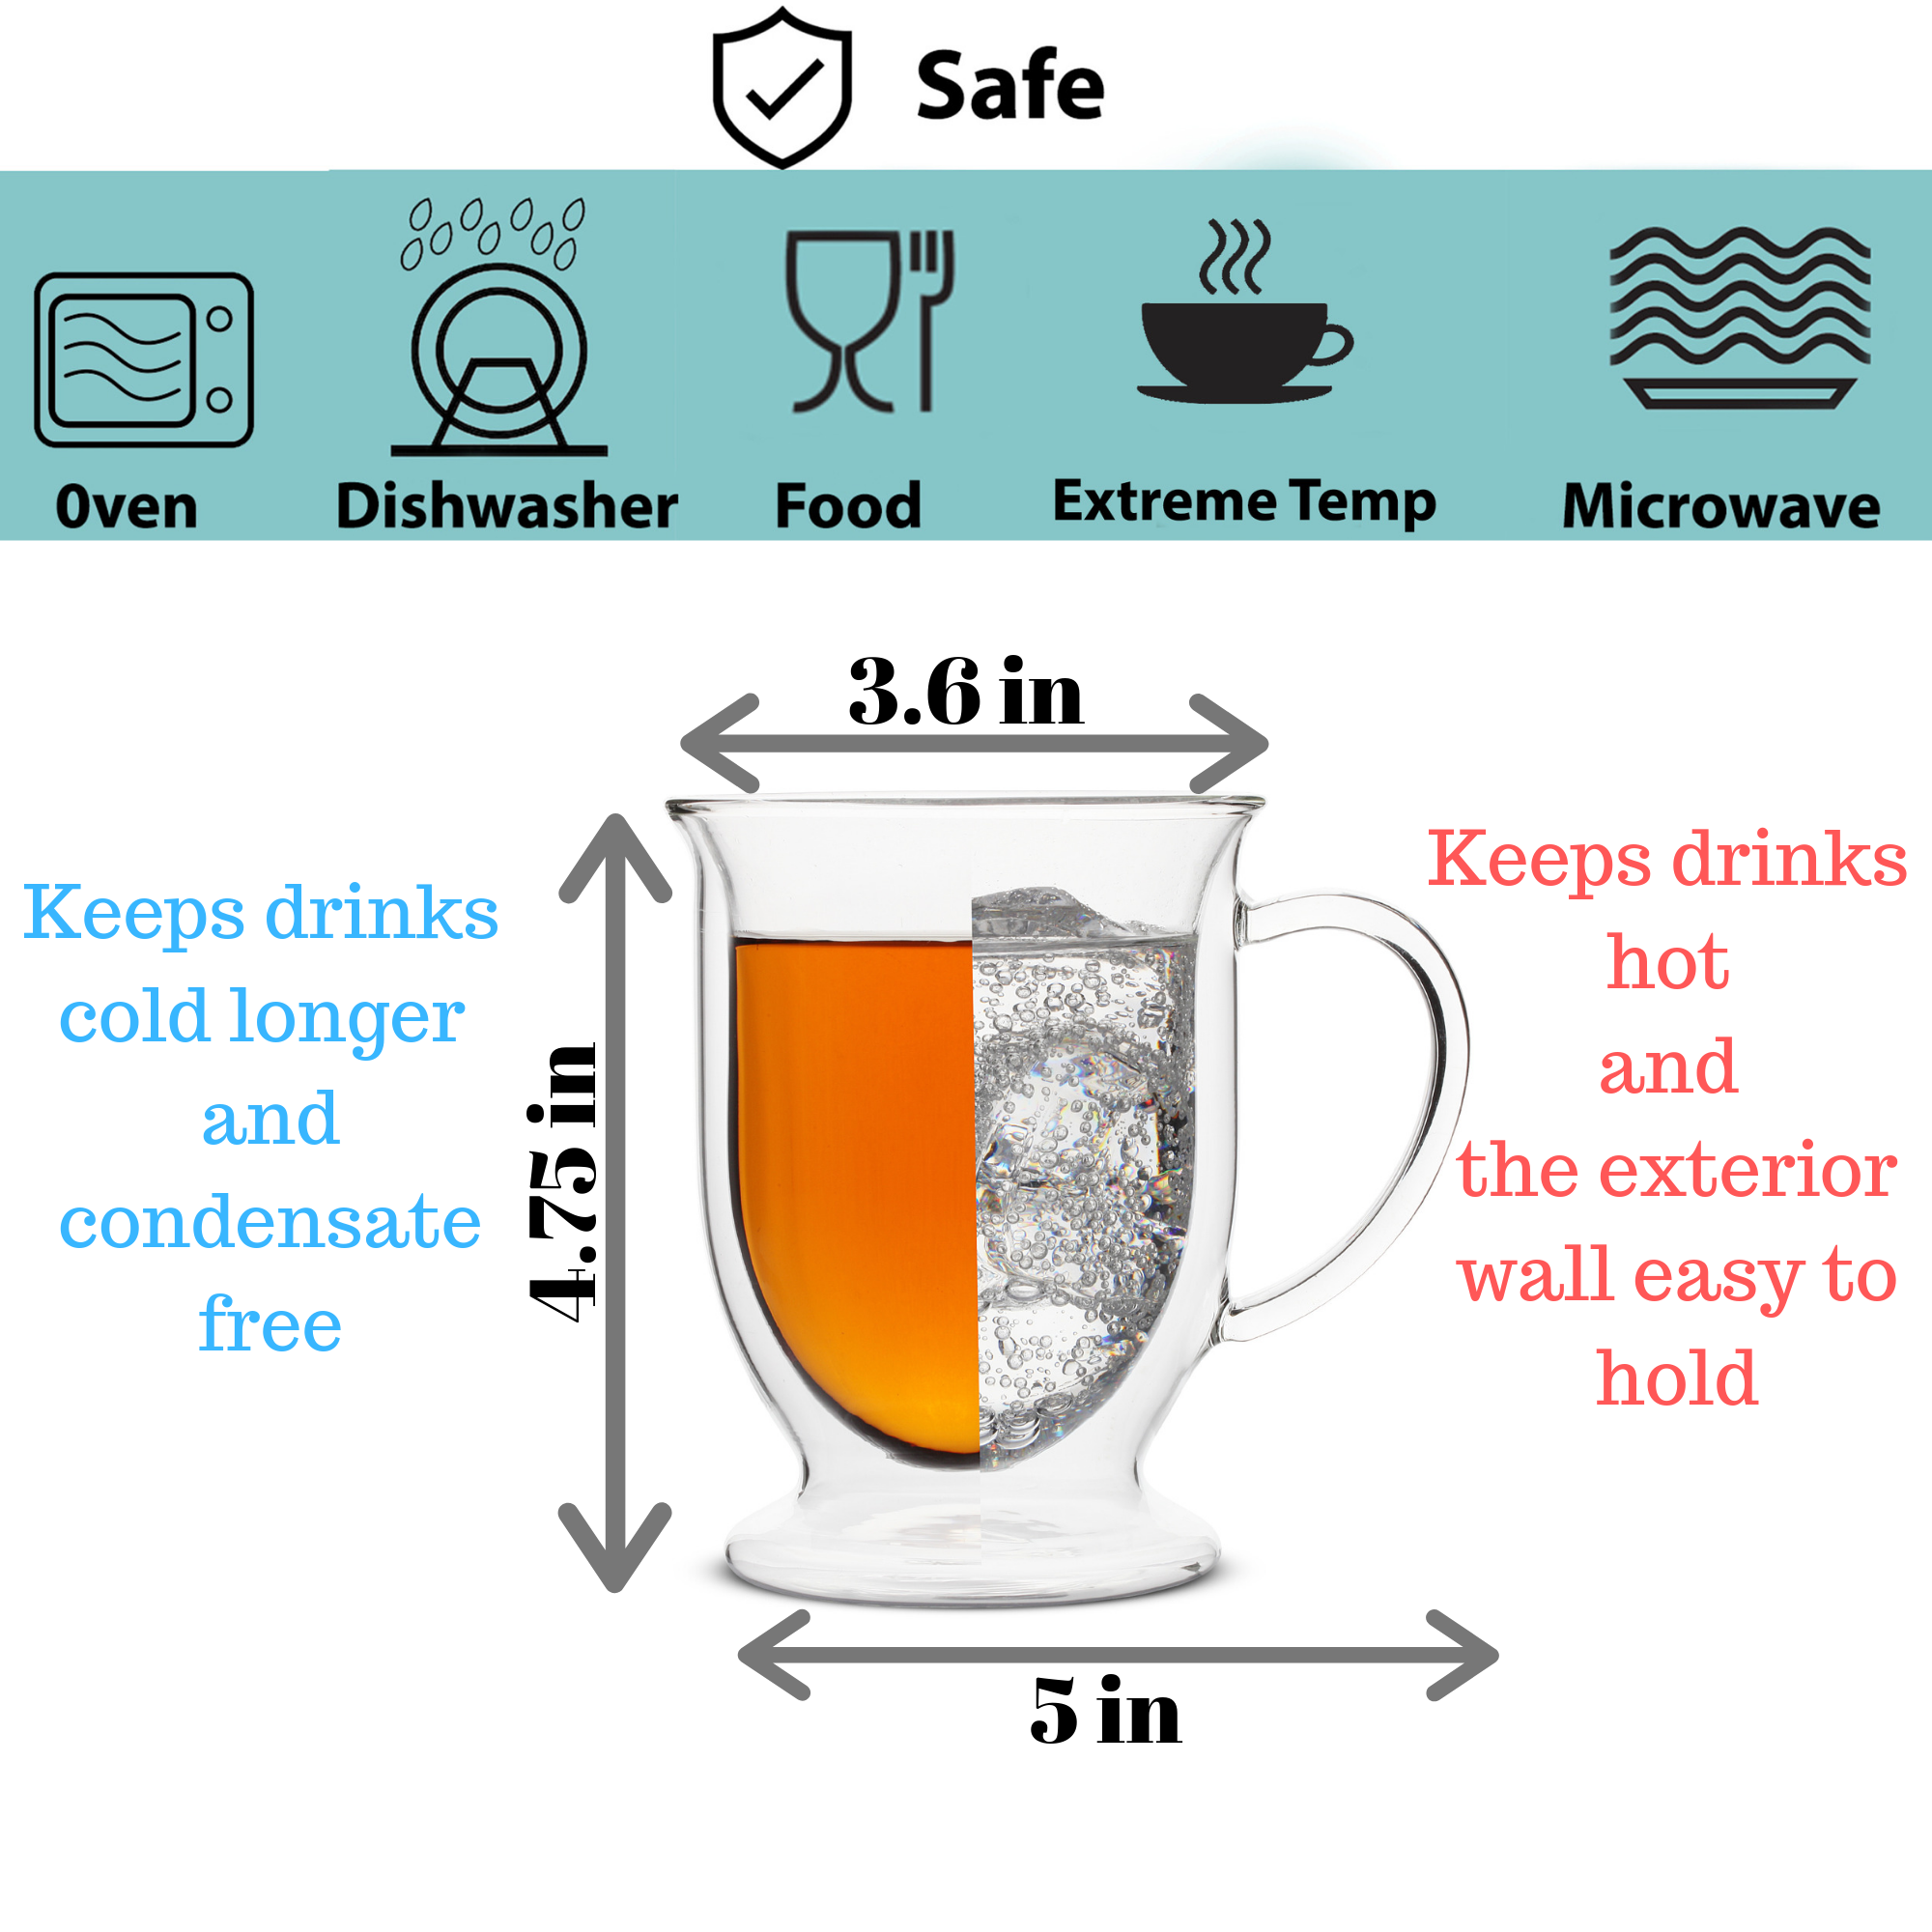 https://www.brewtoatea.com/wp-content/uploads/2019/10/Keeps-drink-cold-longer-and-condensate-free-1.png